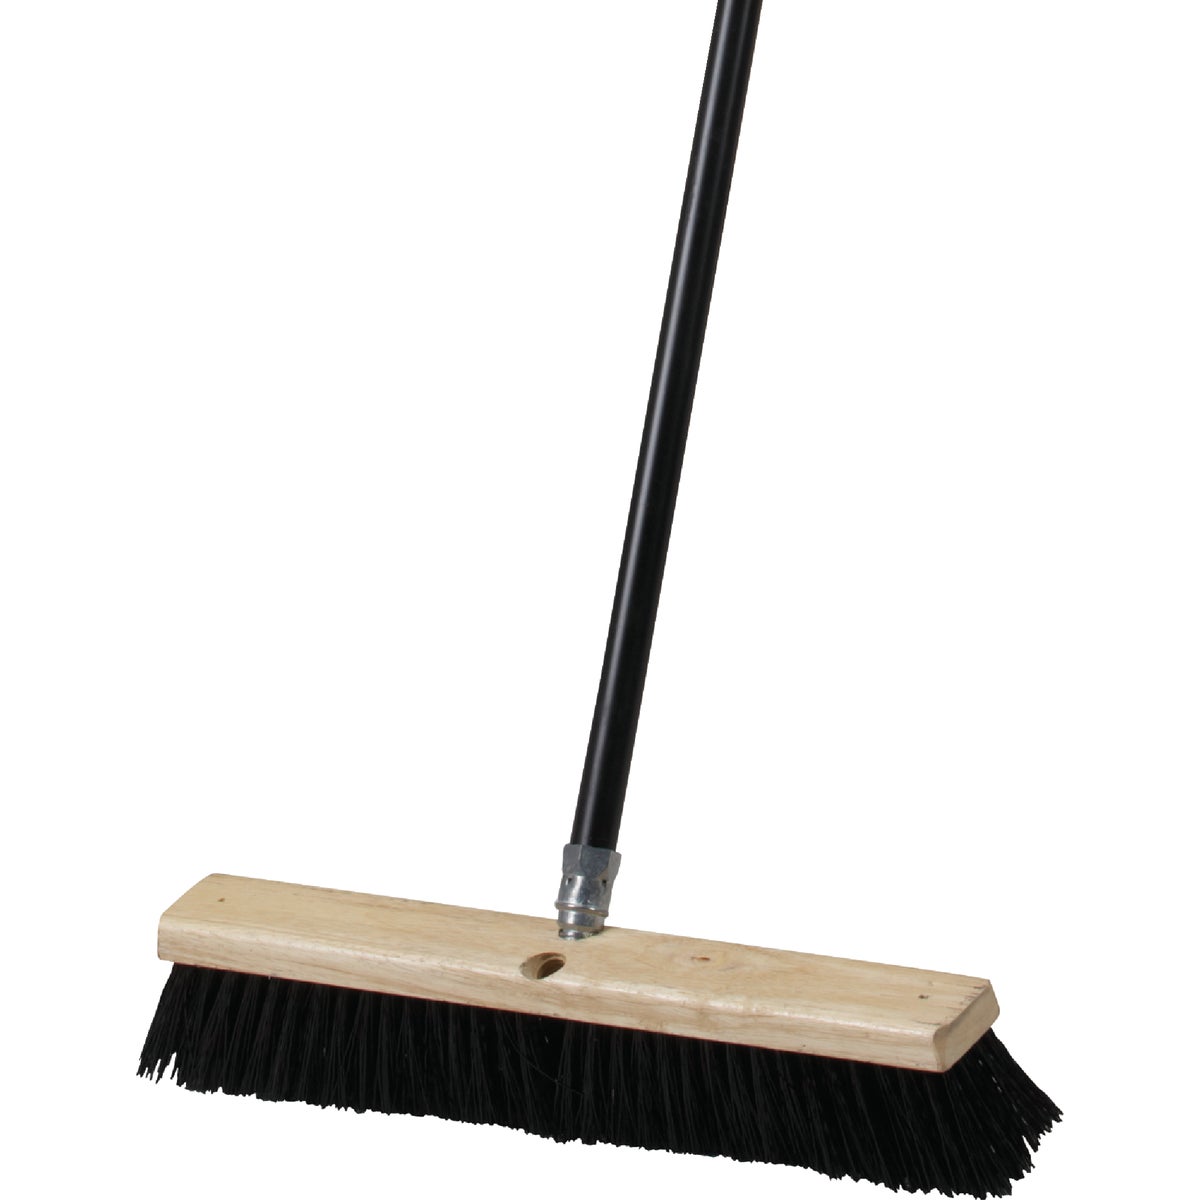 Item 639656, The brush for sweeping wood floors, tile, linoleum, and basements.